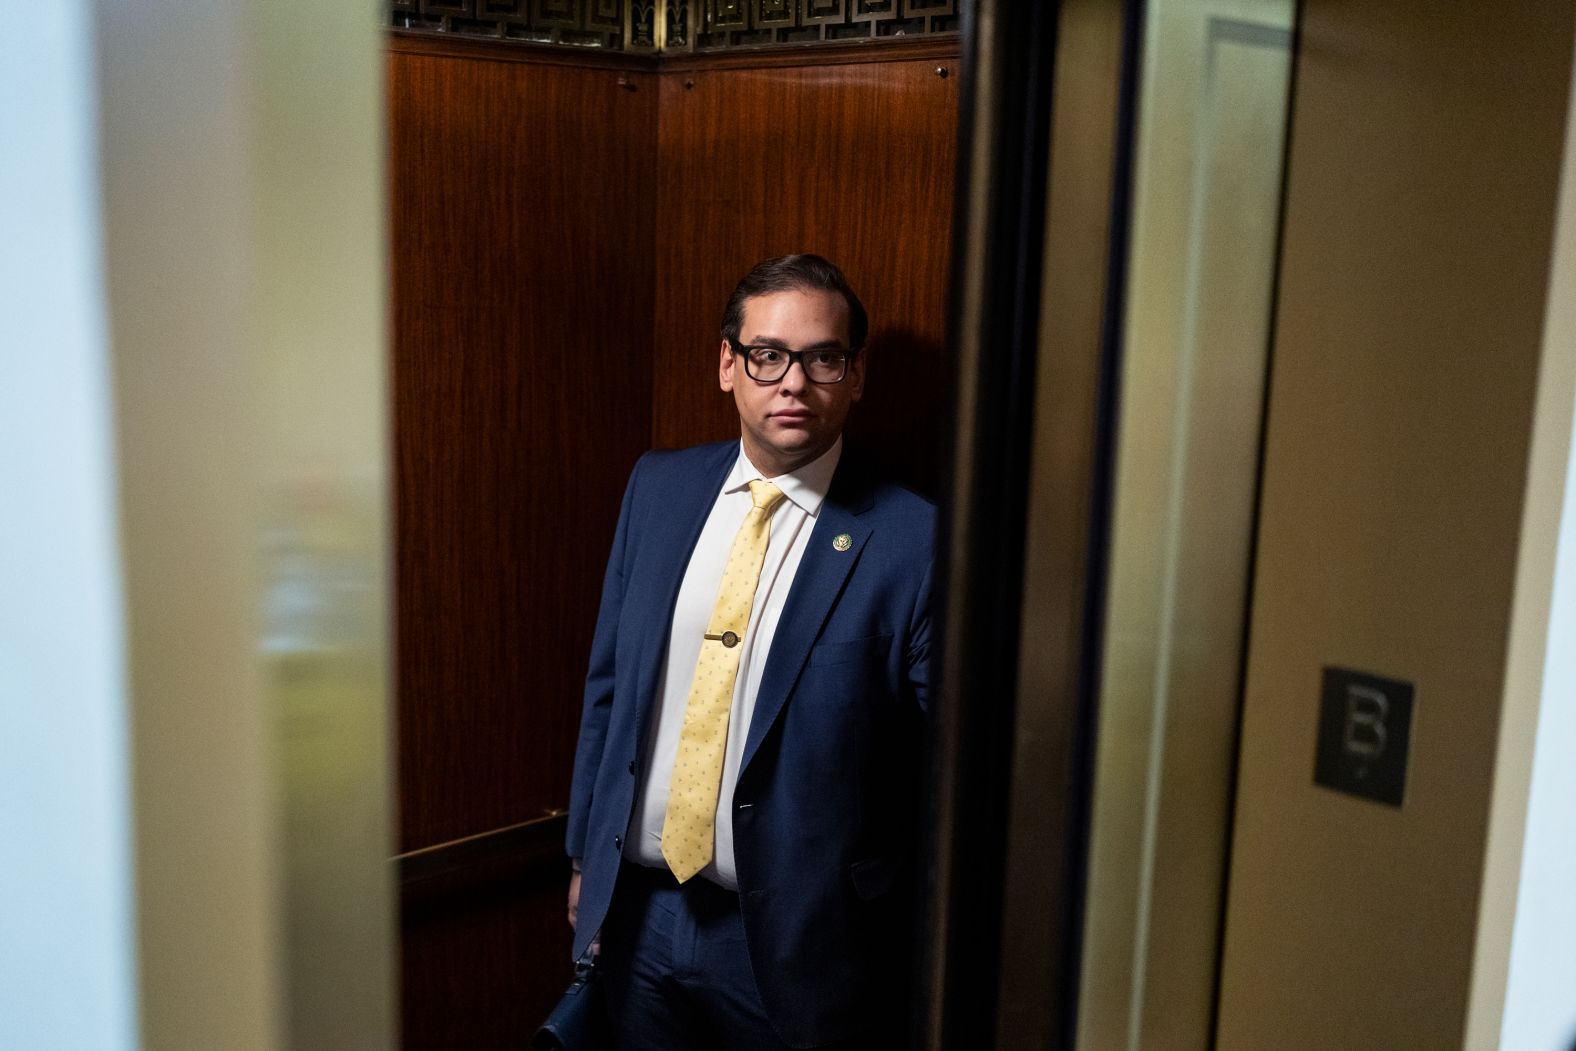 US Rep. George Santos rides an elevator inside the US Capitol on Thursday, January 12. Santos, the recently elected GOP congressman from New York who has admitted to lying about parts of his resume, <a href="index.php?page=&url=https%3A%2F%2Fwww.cnn.com%2F2023%2F01%2F12%2Fpolitics%2Fgeorge-santos-calls-to-resign%2Findex.html" target="_blank">is facing escalating backlash from his own party</a> as a growing number of House Republican lawmakers call for him to resign or say he can't serve effectively.